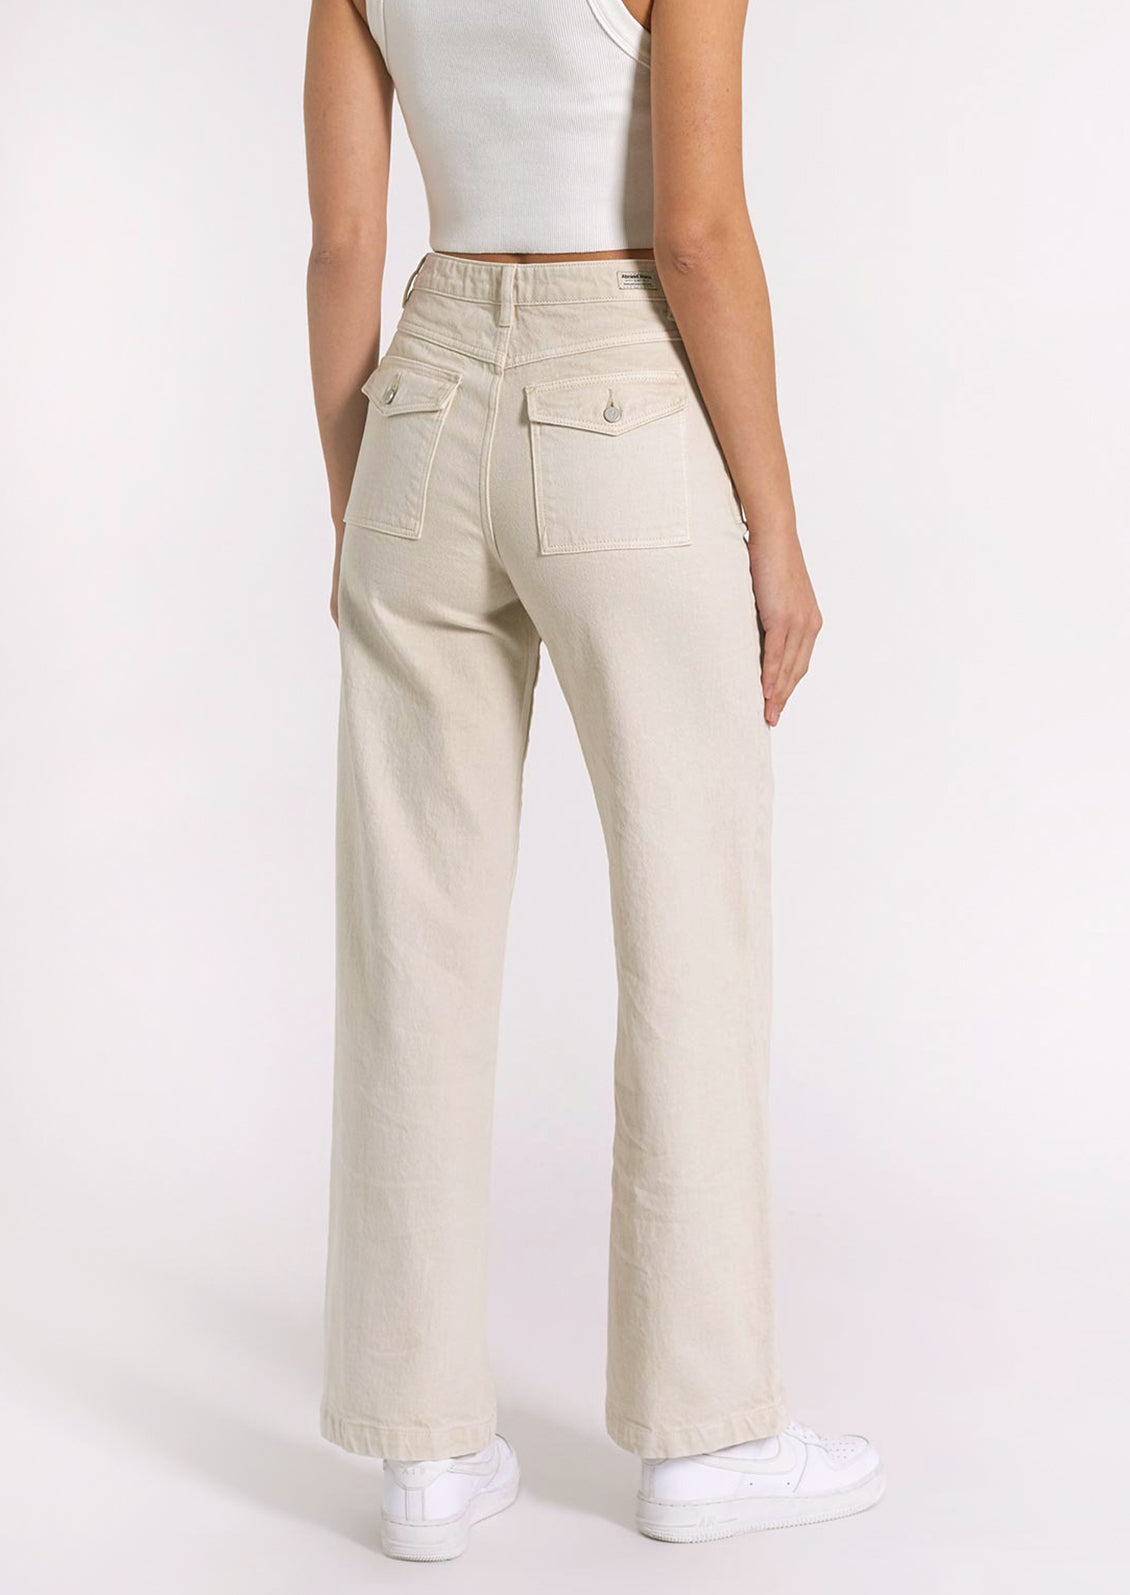 Cream colored denim jeans with high rise and back patch pocket with button flap closure.